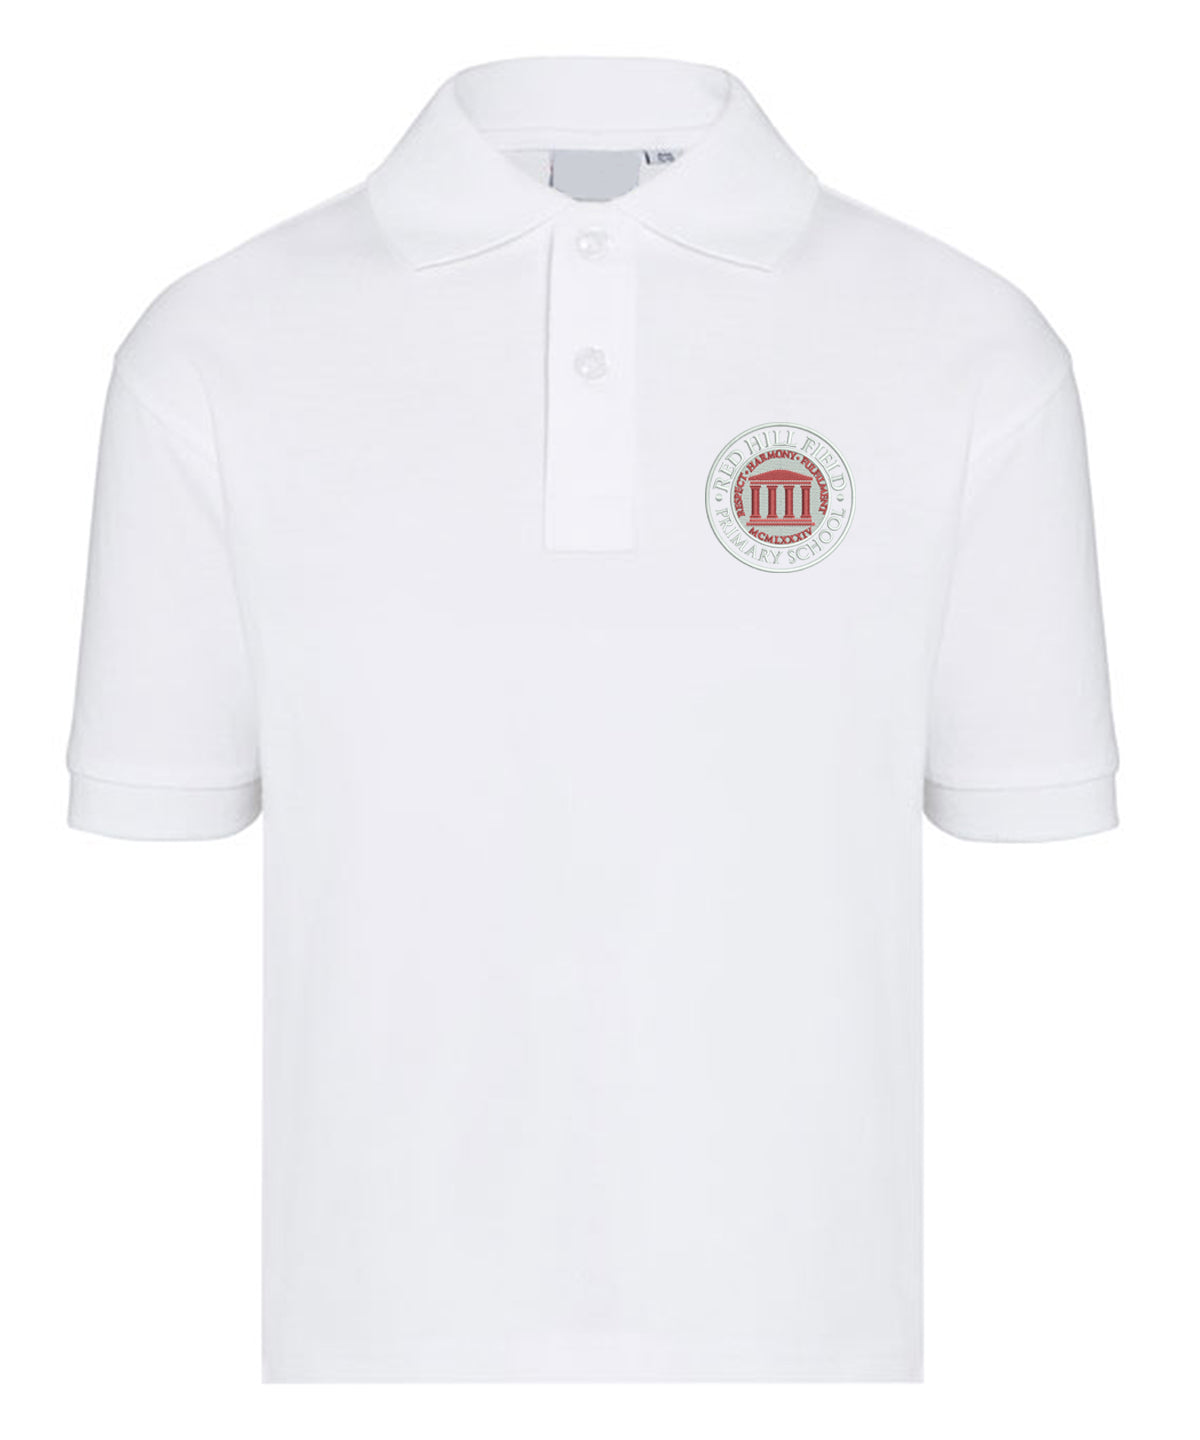 Red Hill Field Primary - White Polo Shirt